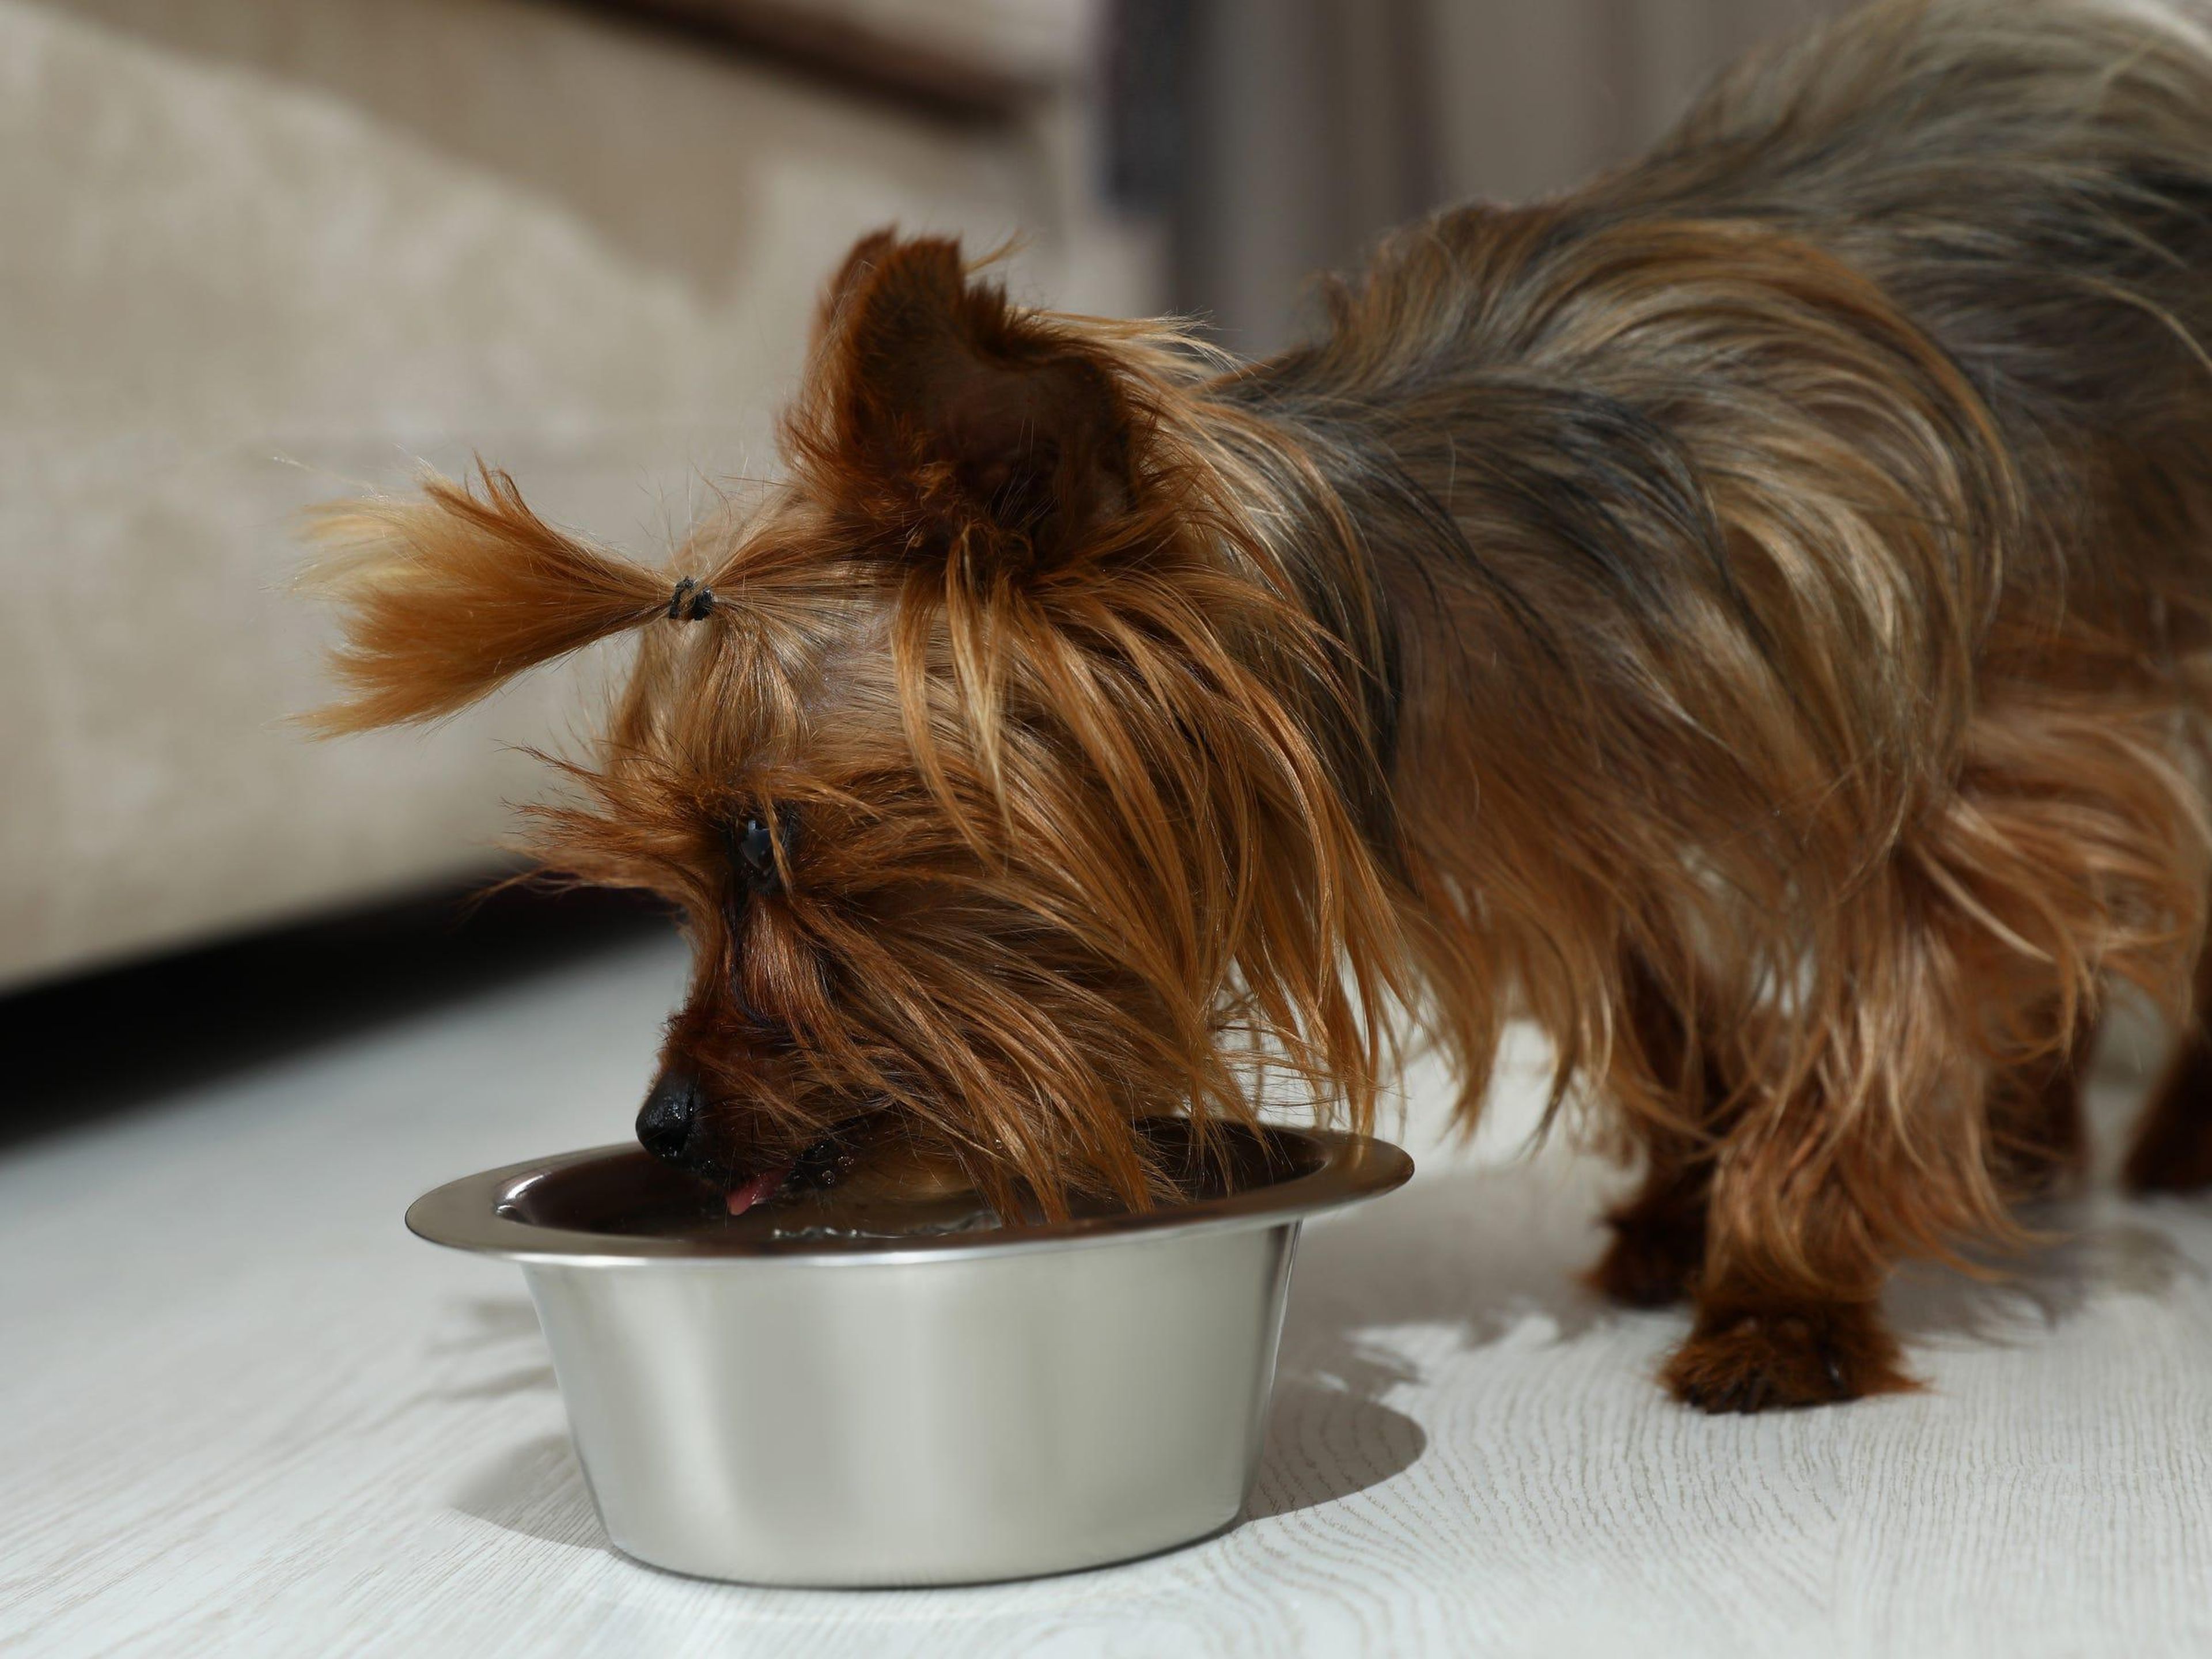 Stick to your pet's regular feeding schedule, even if you're home all day.